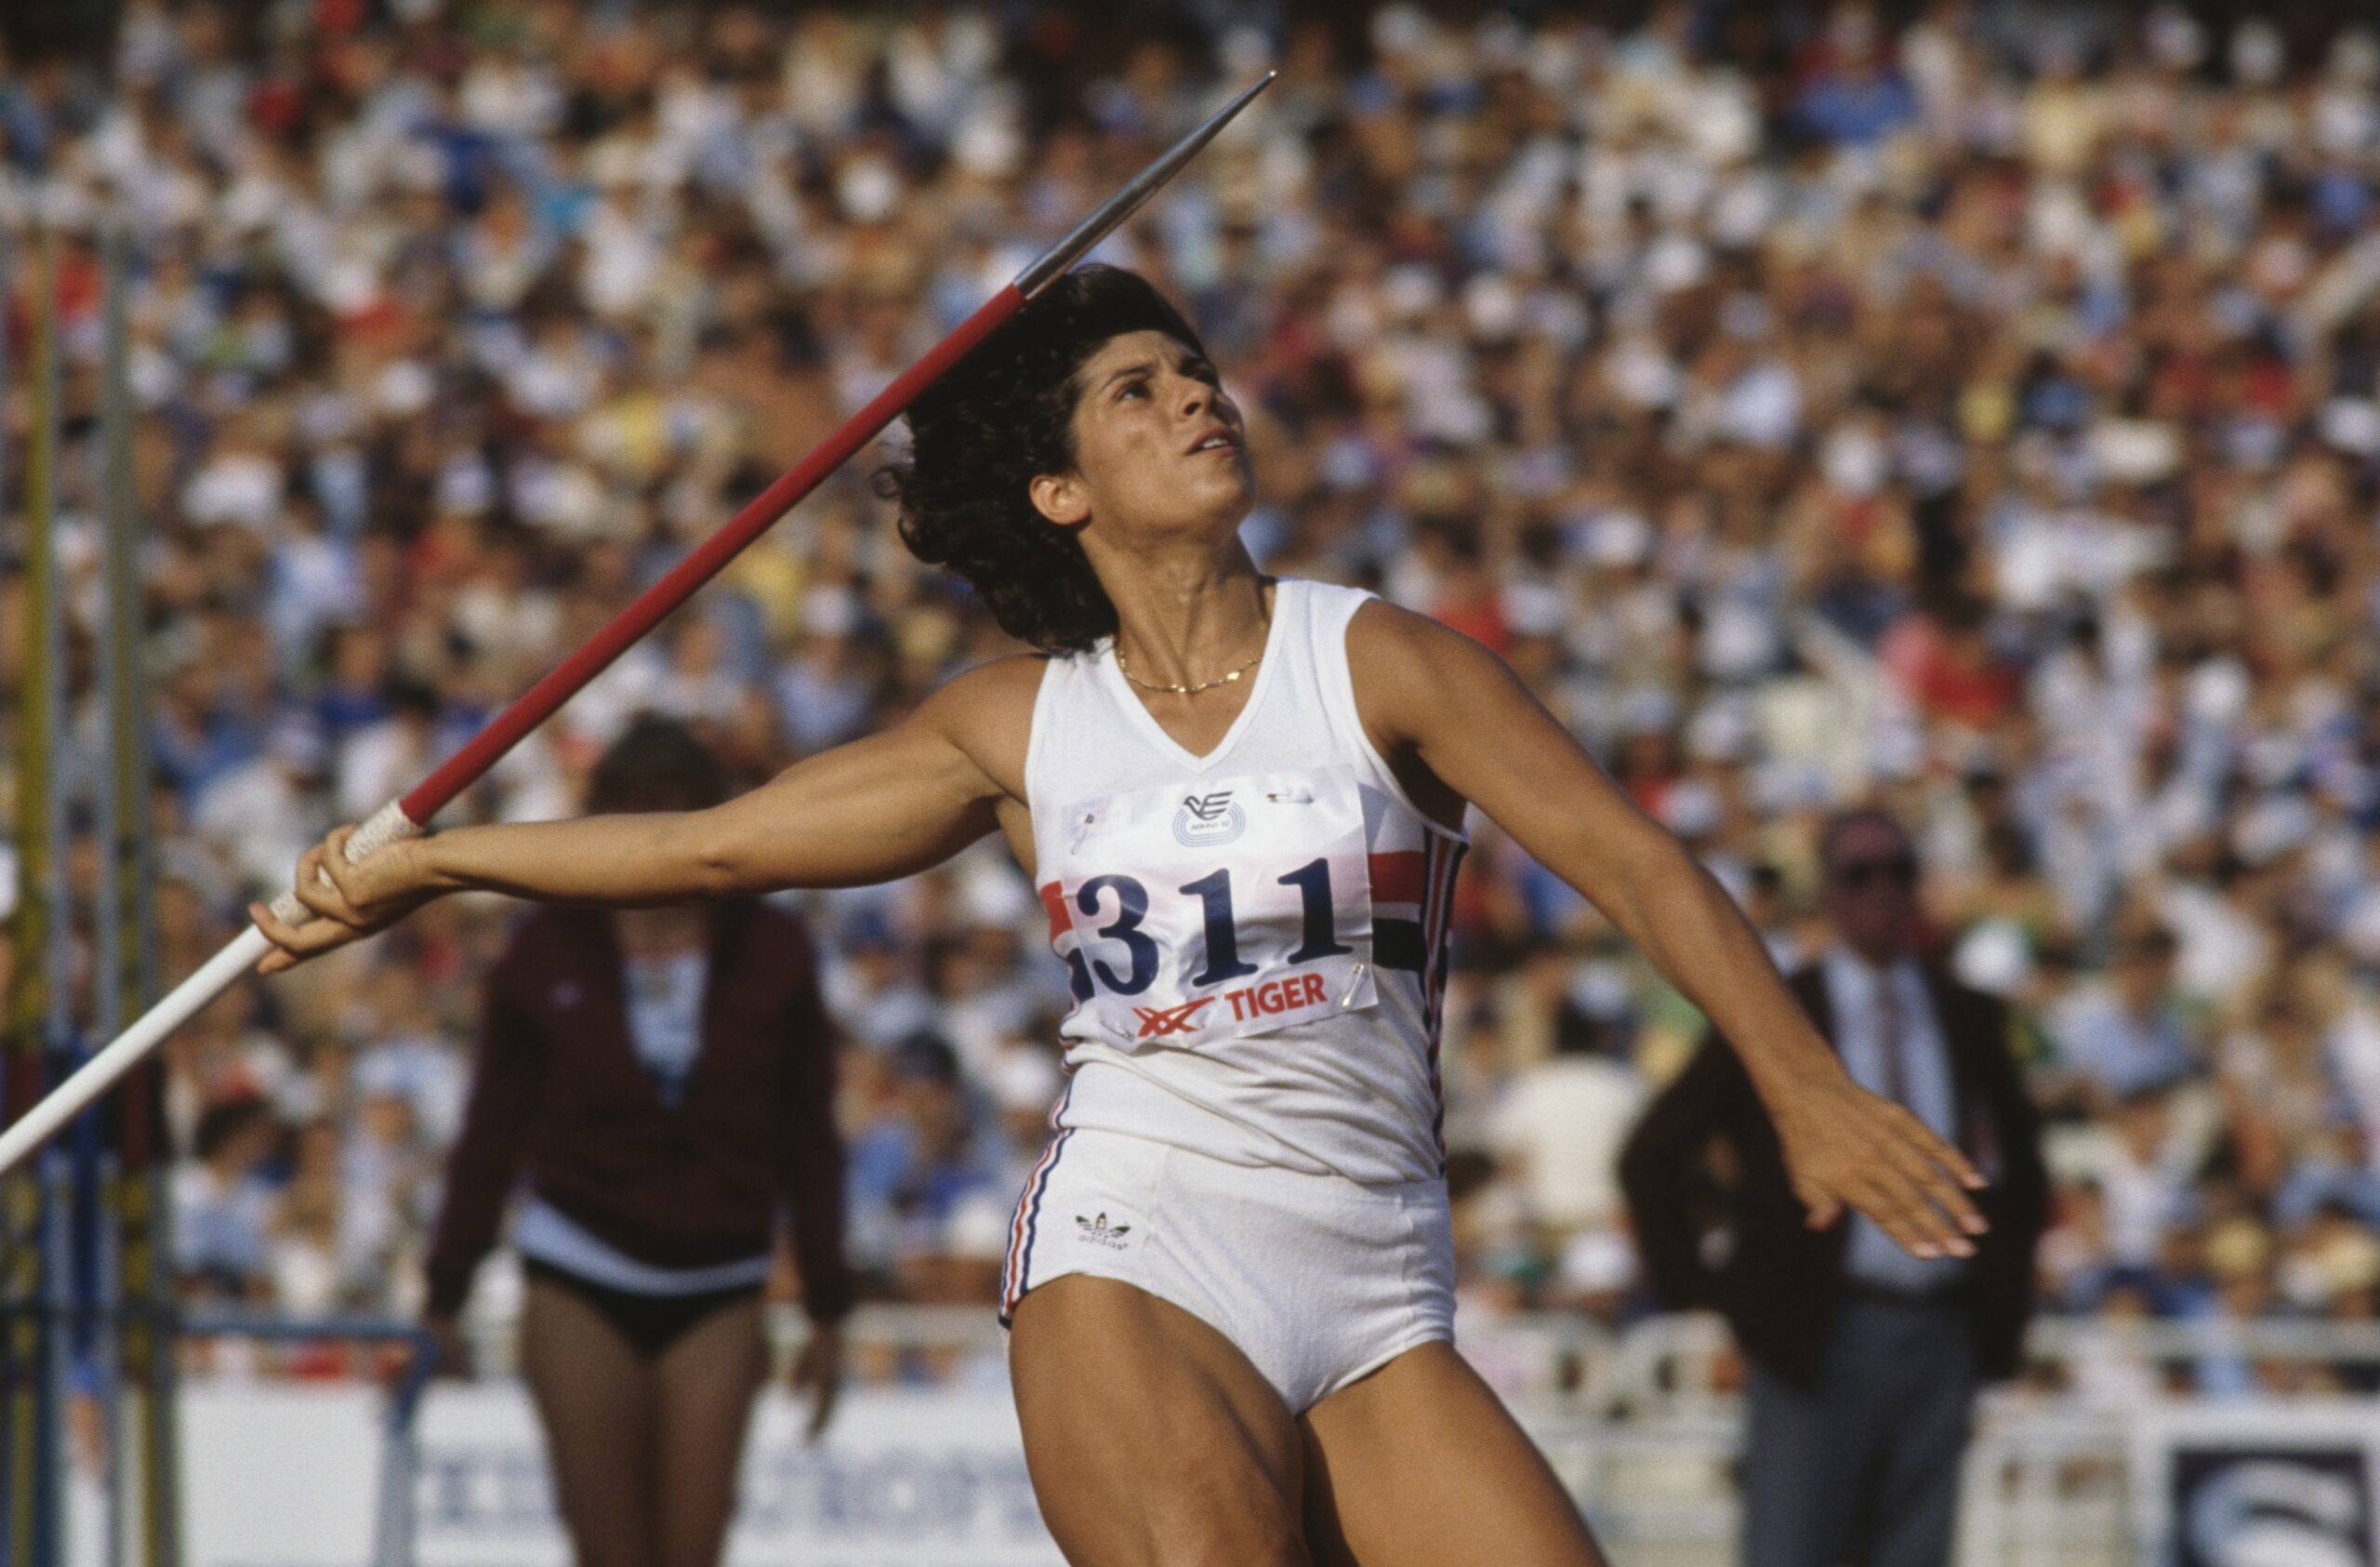 Fatima Whitbread throws the javelin during 1982 Olympics